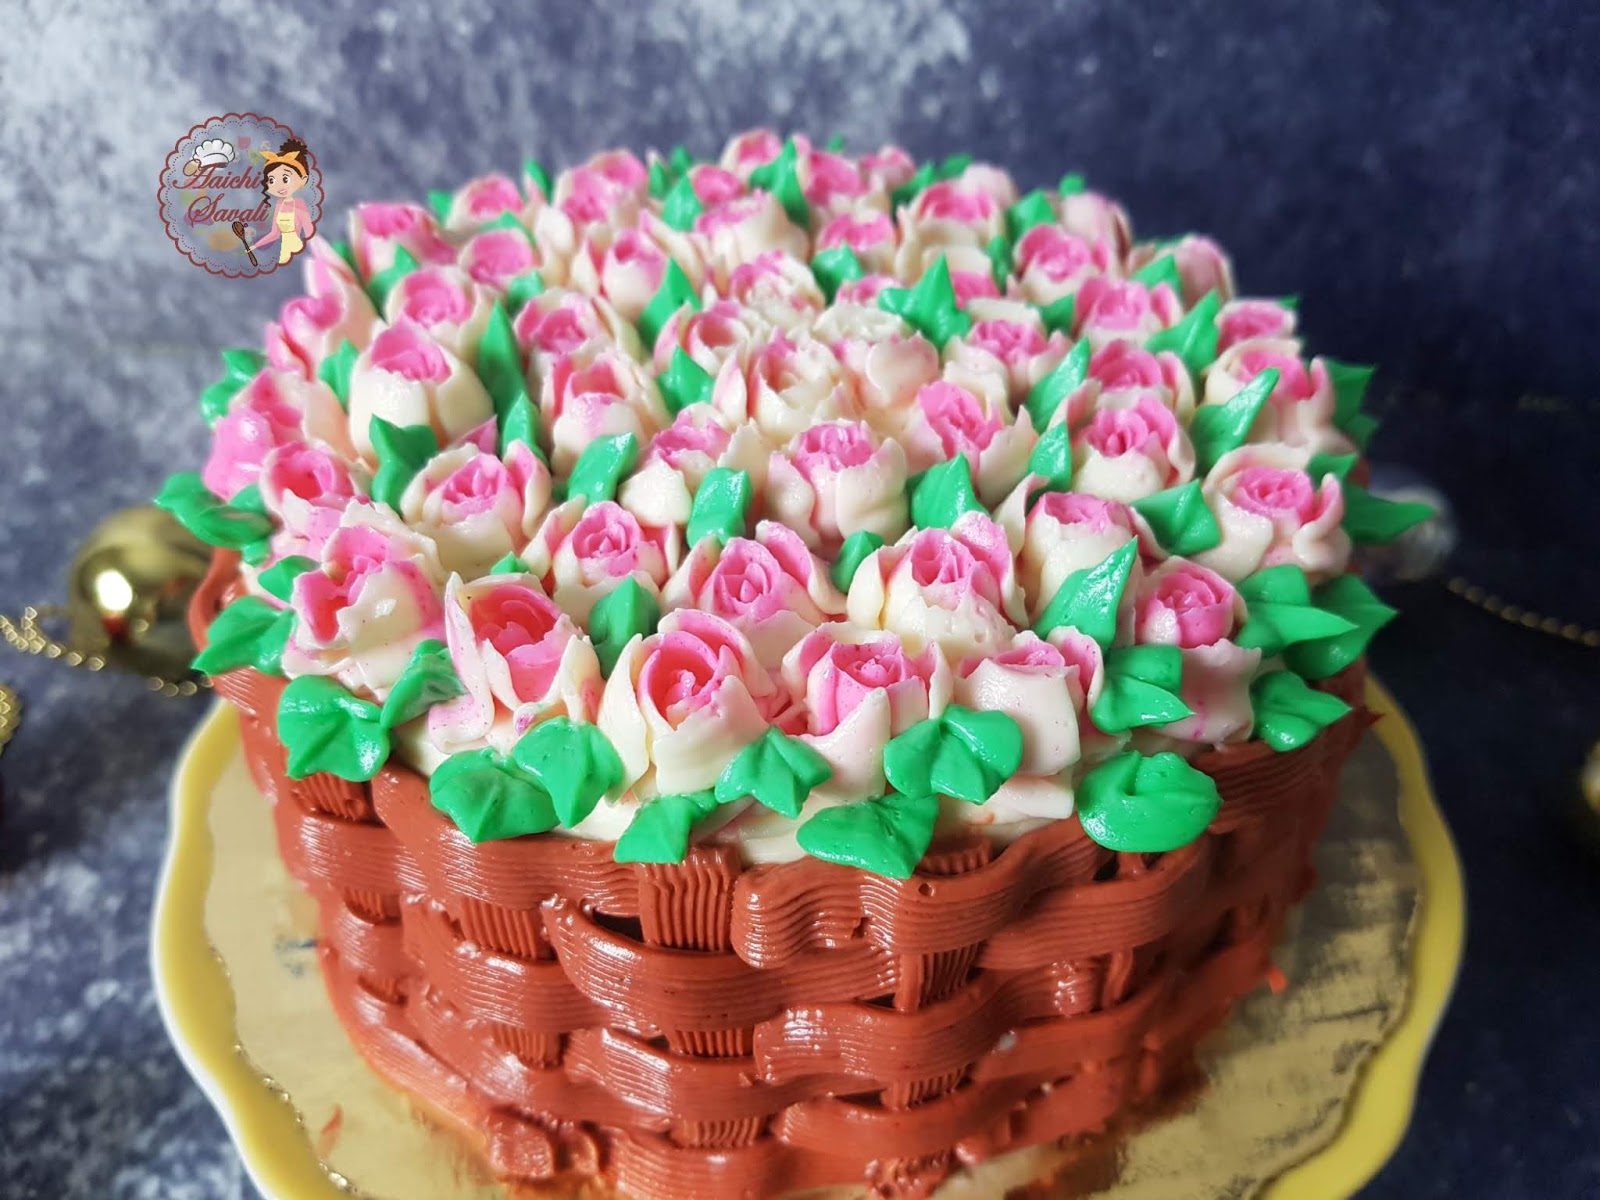 Flower Basket Cake Using Russian Piping Tips/How to Use Russian Piping